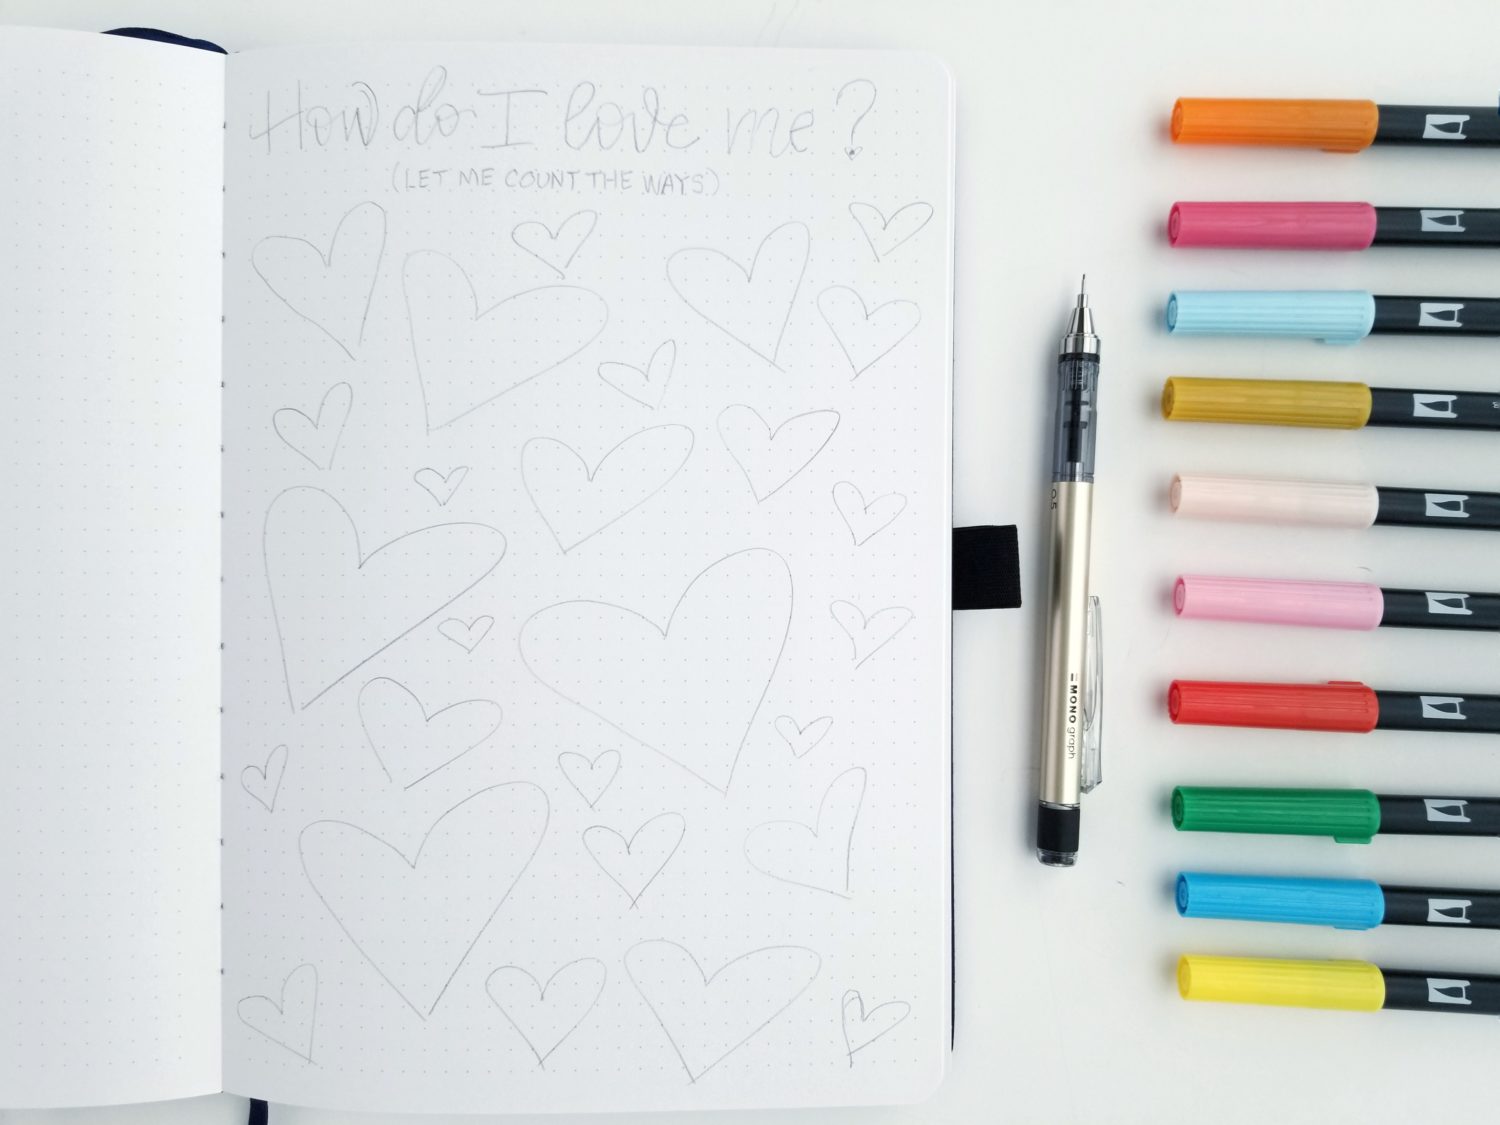 Introduction to Bullet Journaling – With Love, Melissa